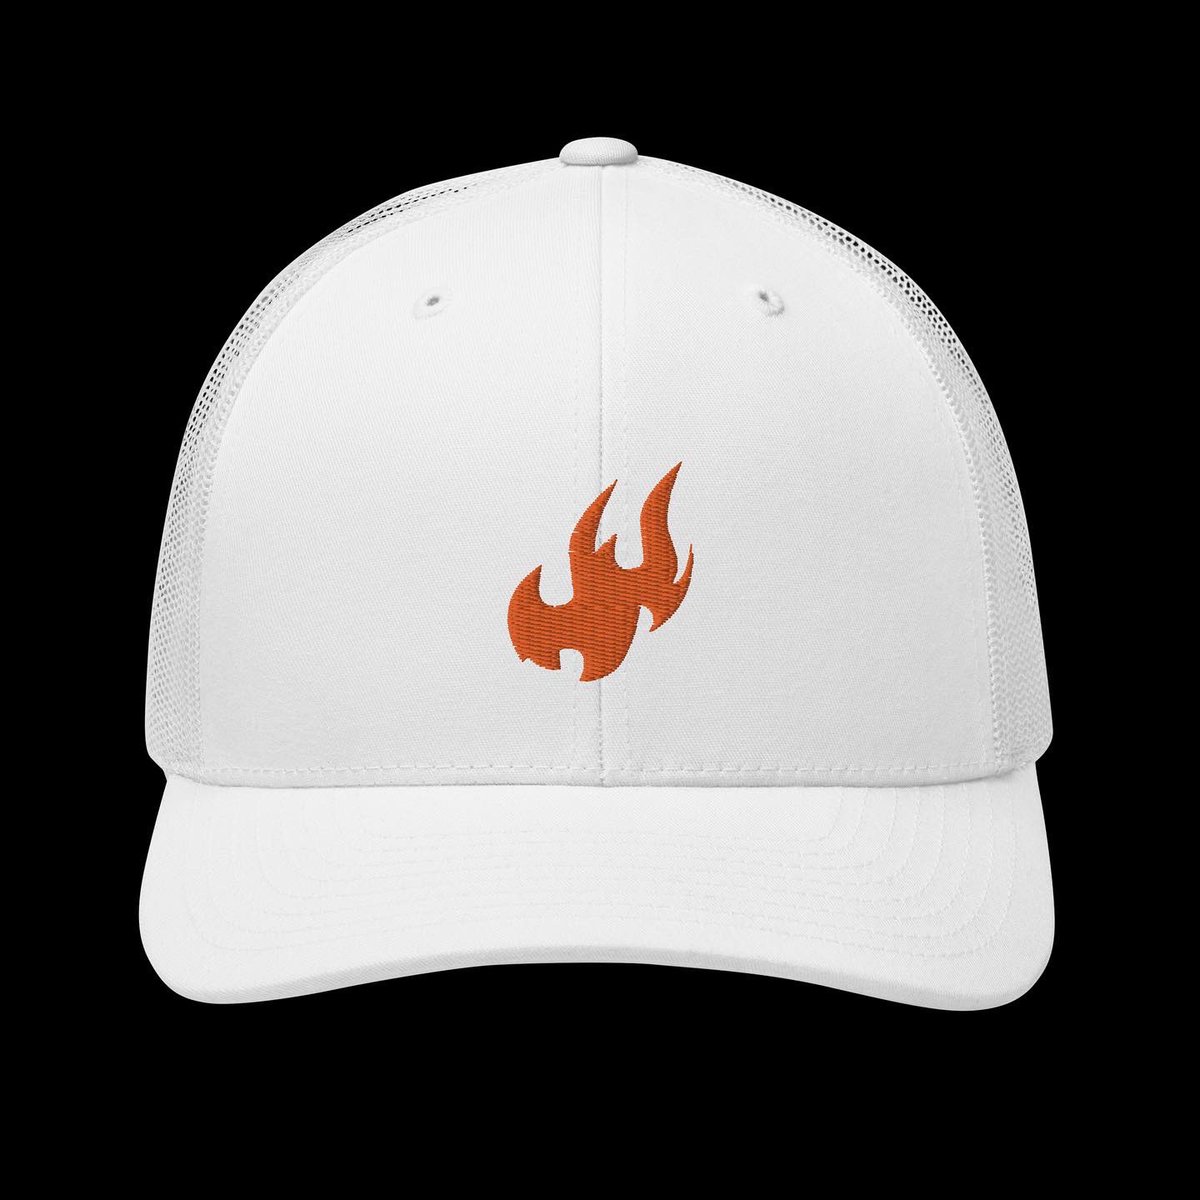 Breaking barriers and soaring high🔥🔥AVAILABLE NOW🔥🔥 #thebattleiswithin #brand #mindset #truckerhat